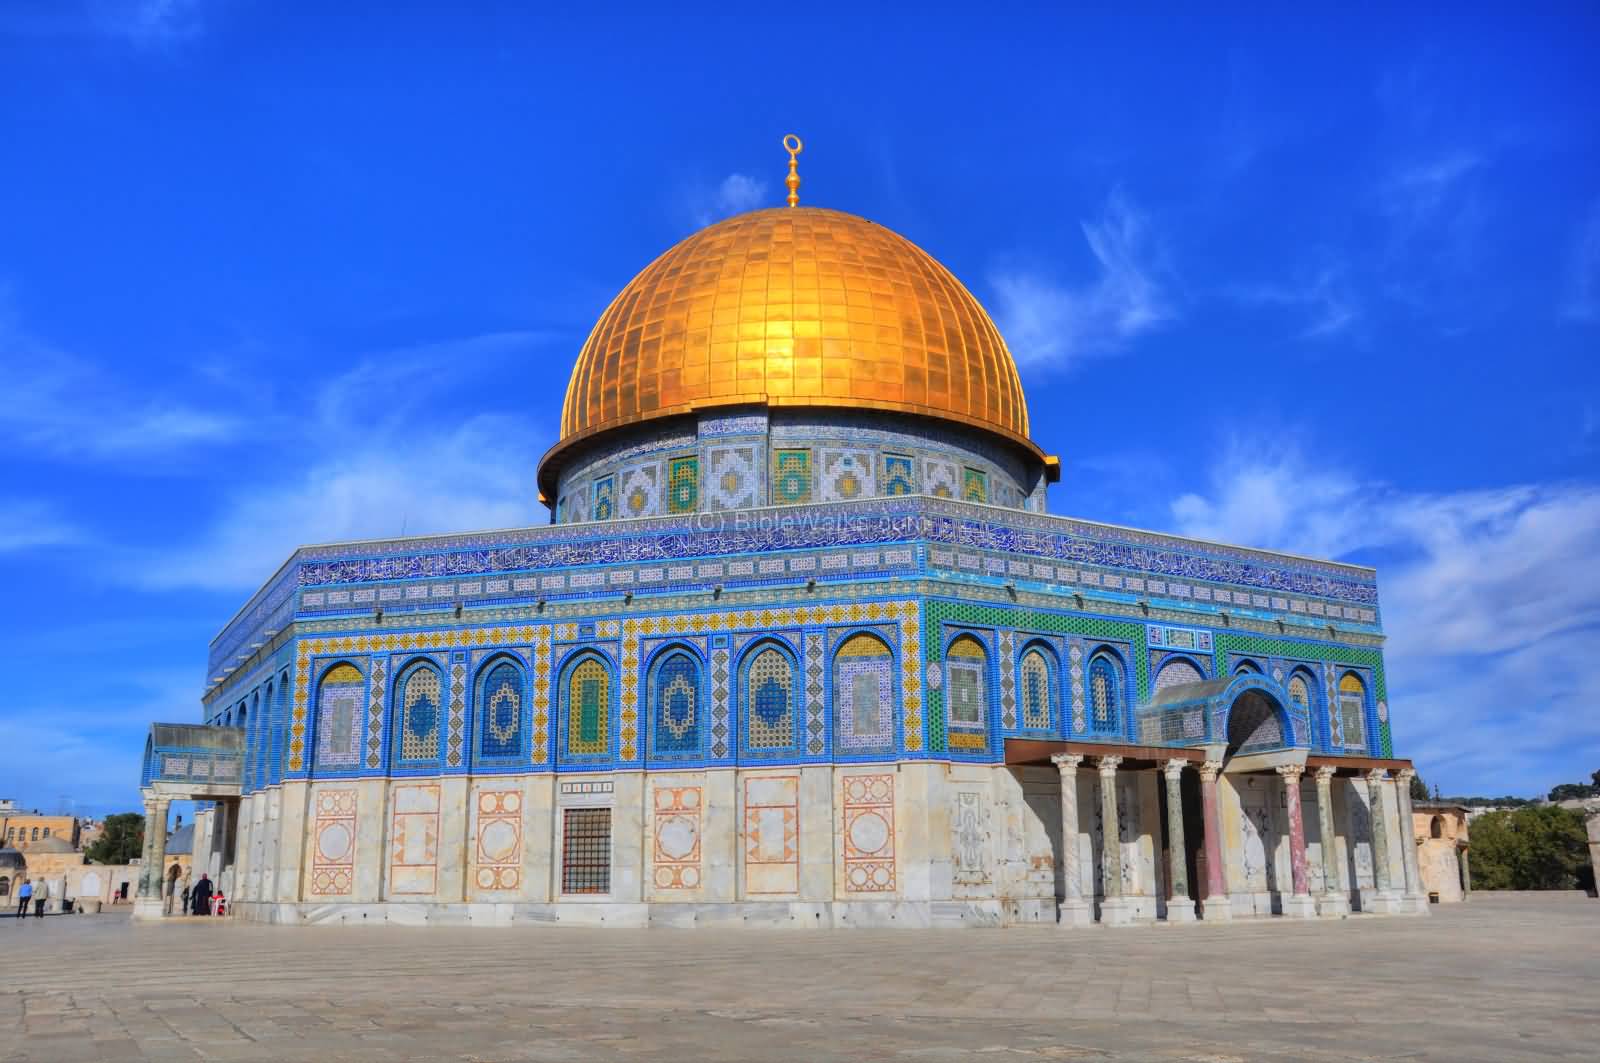 Side View Of The Dome Of The Rock Shrine In Jerusalem, Israel